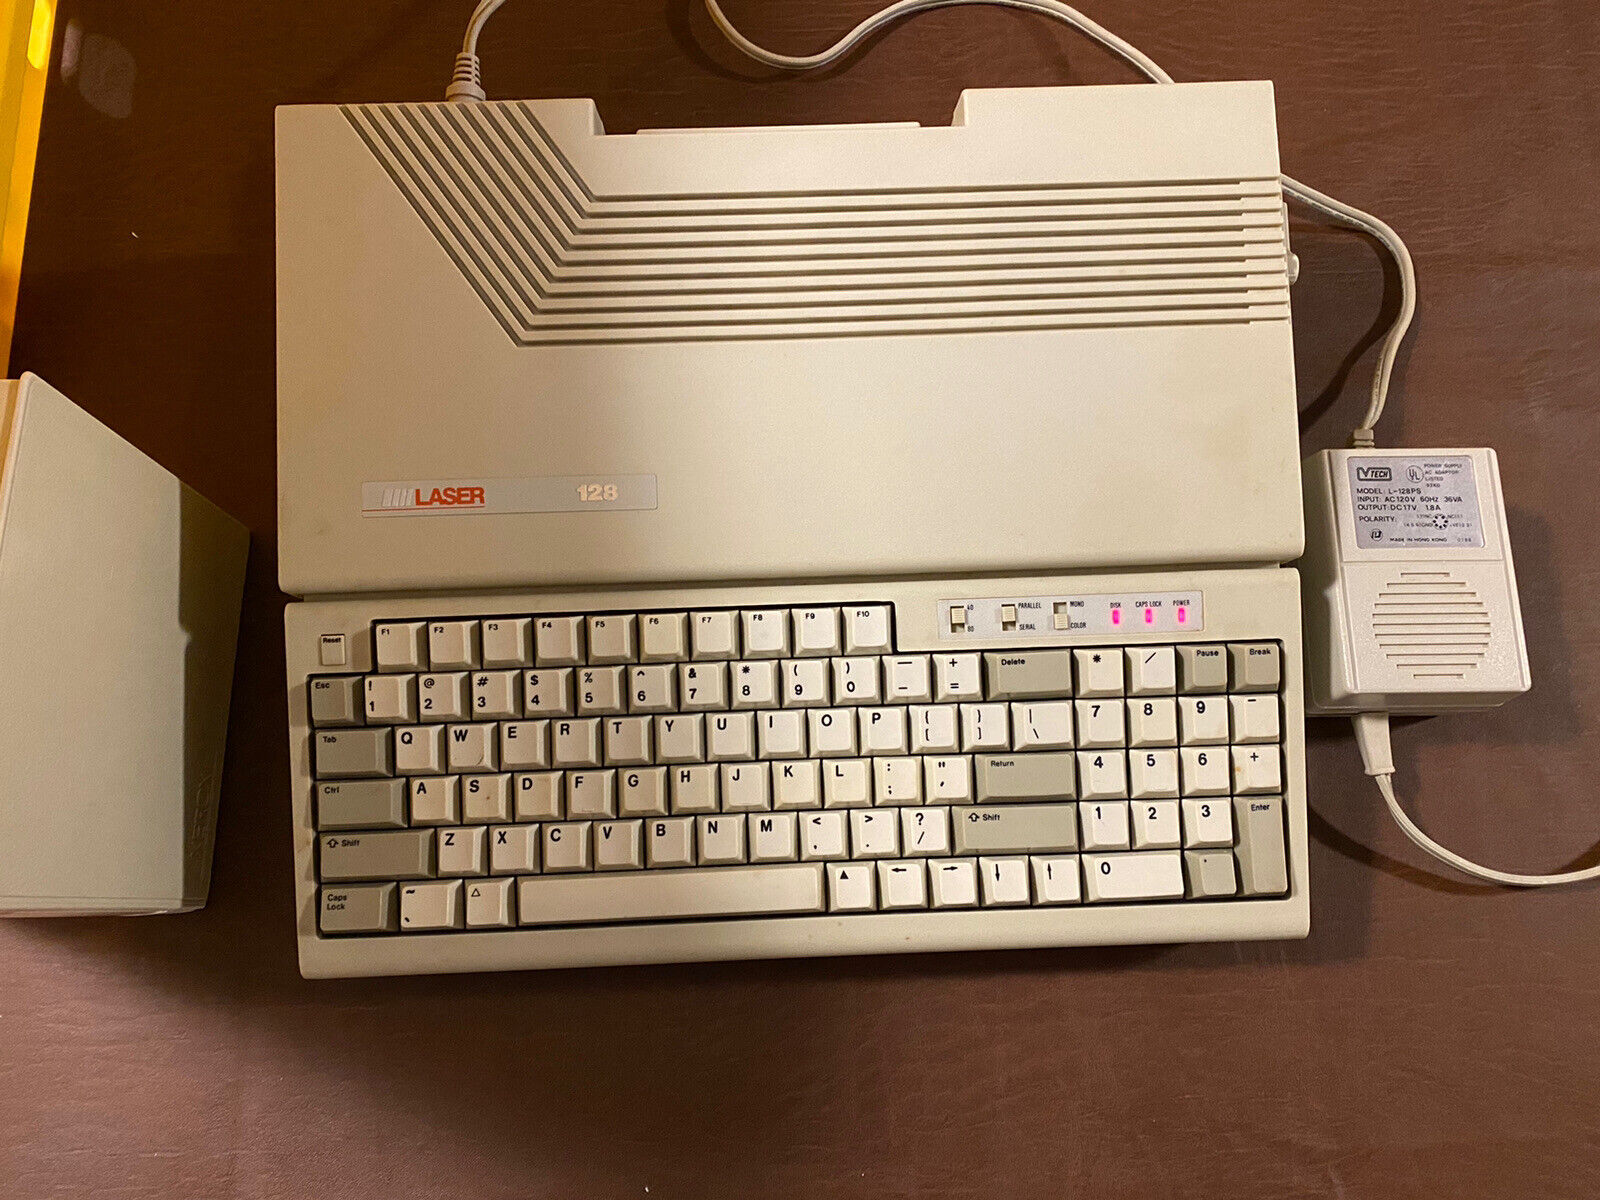 Working Laser 128 computer with OEM power supply and software